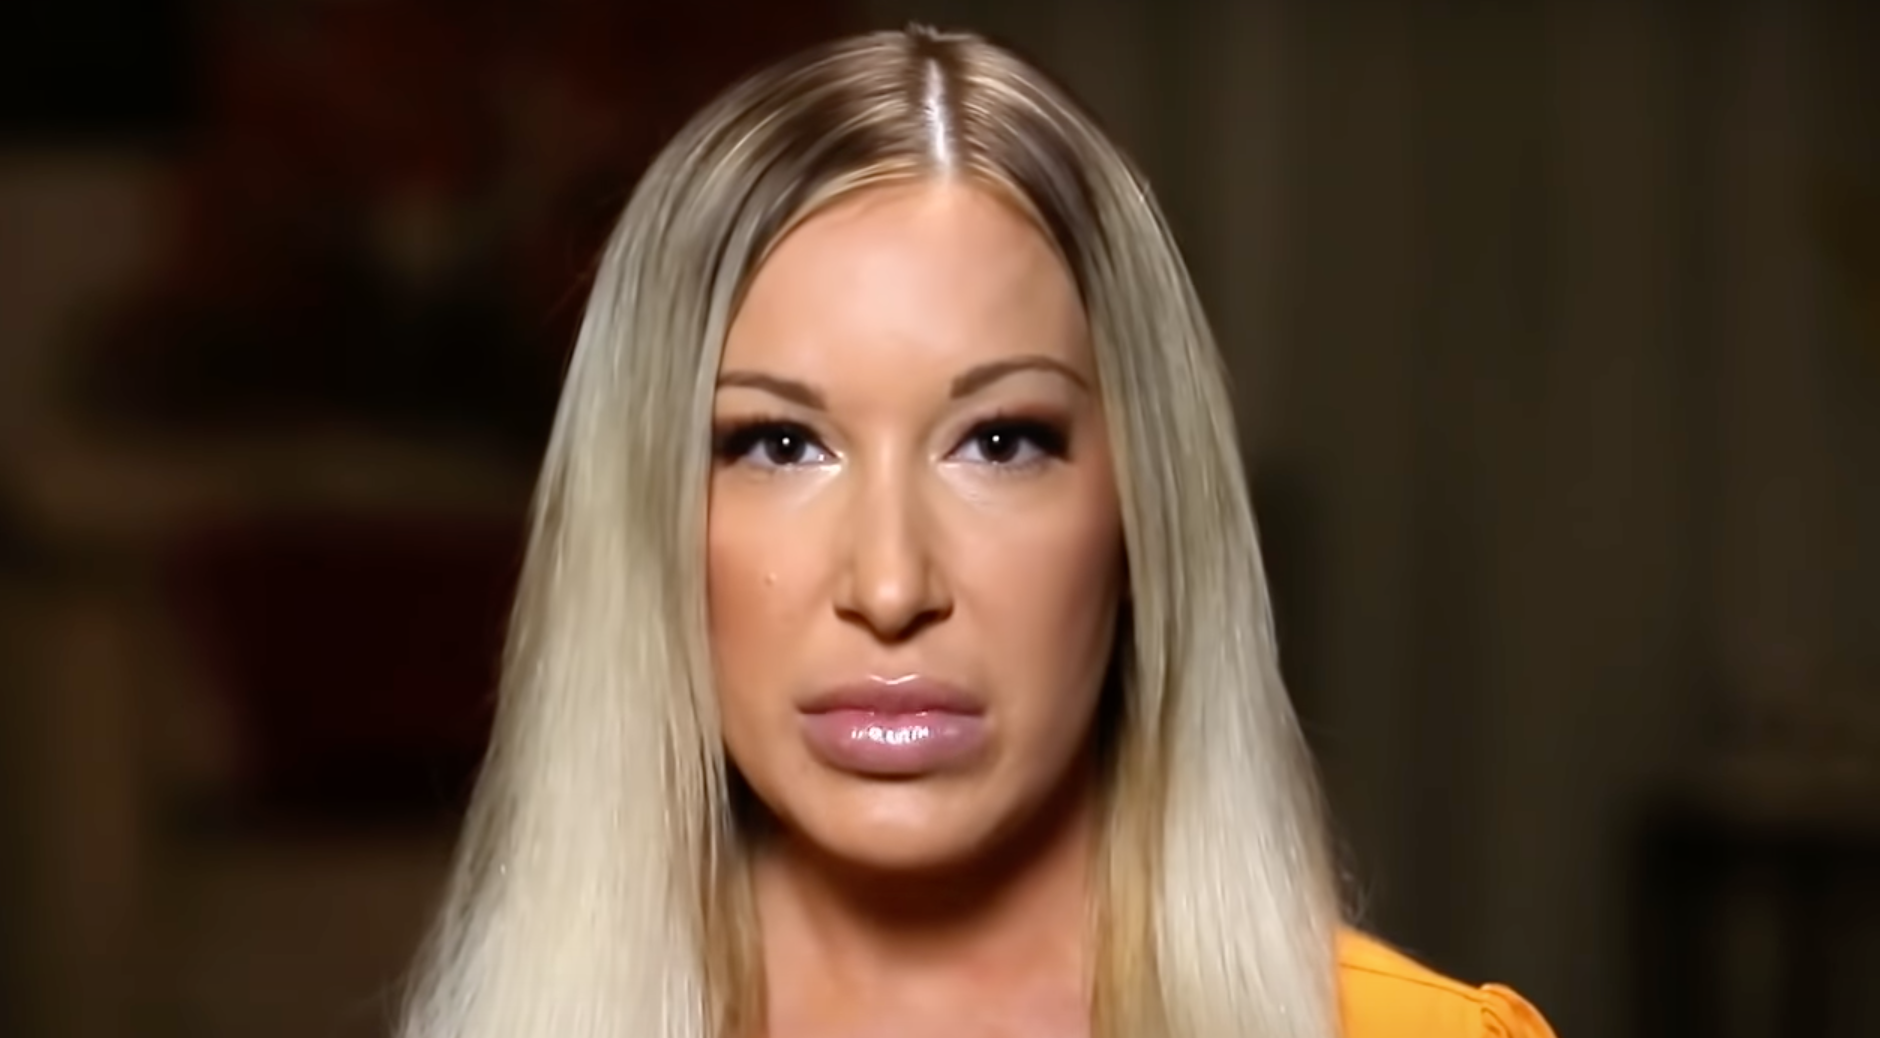 What Does Lacey From 'Love After Lockup' Do for a Living?